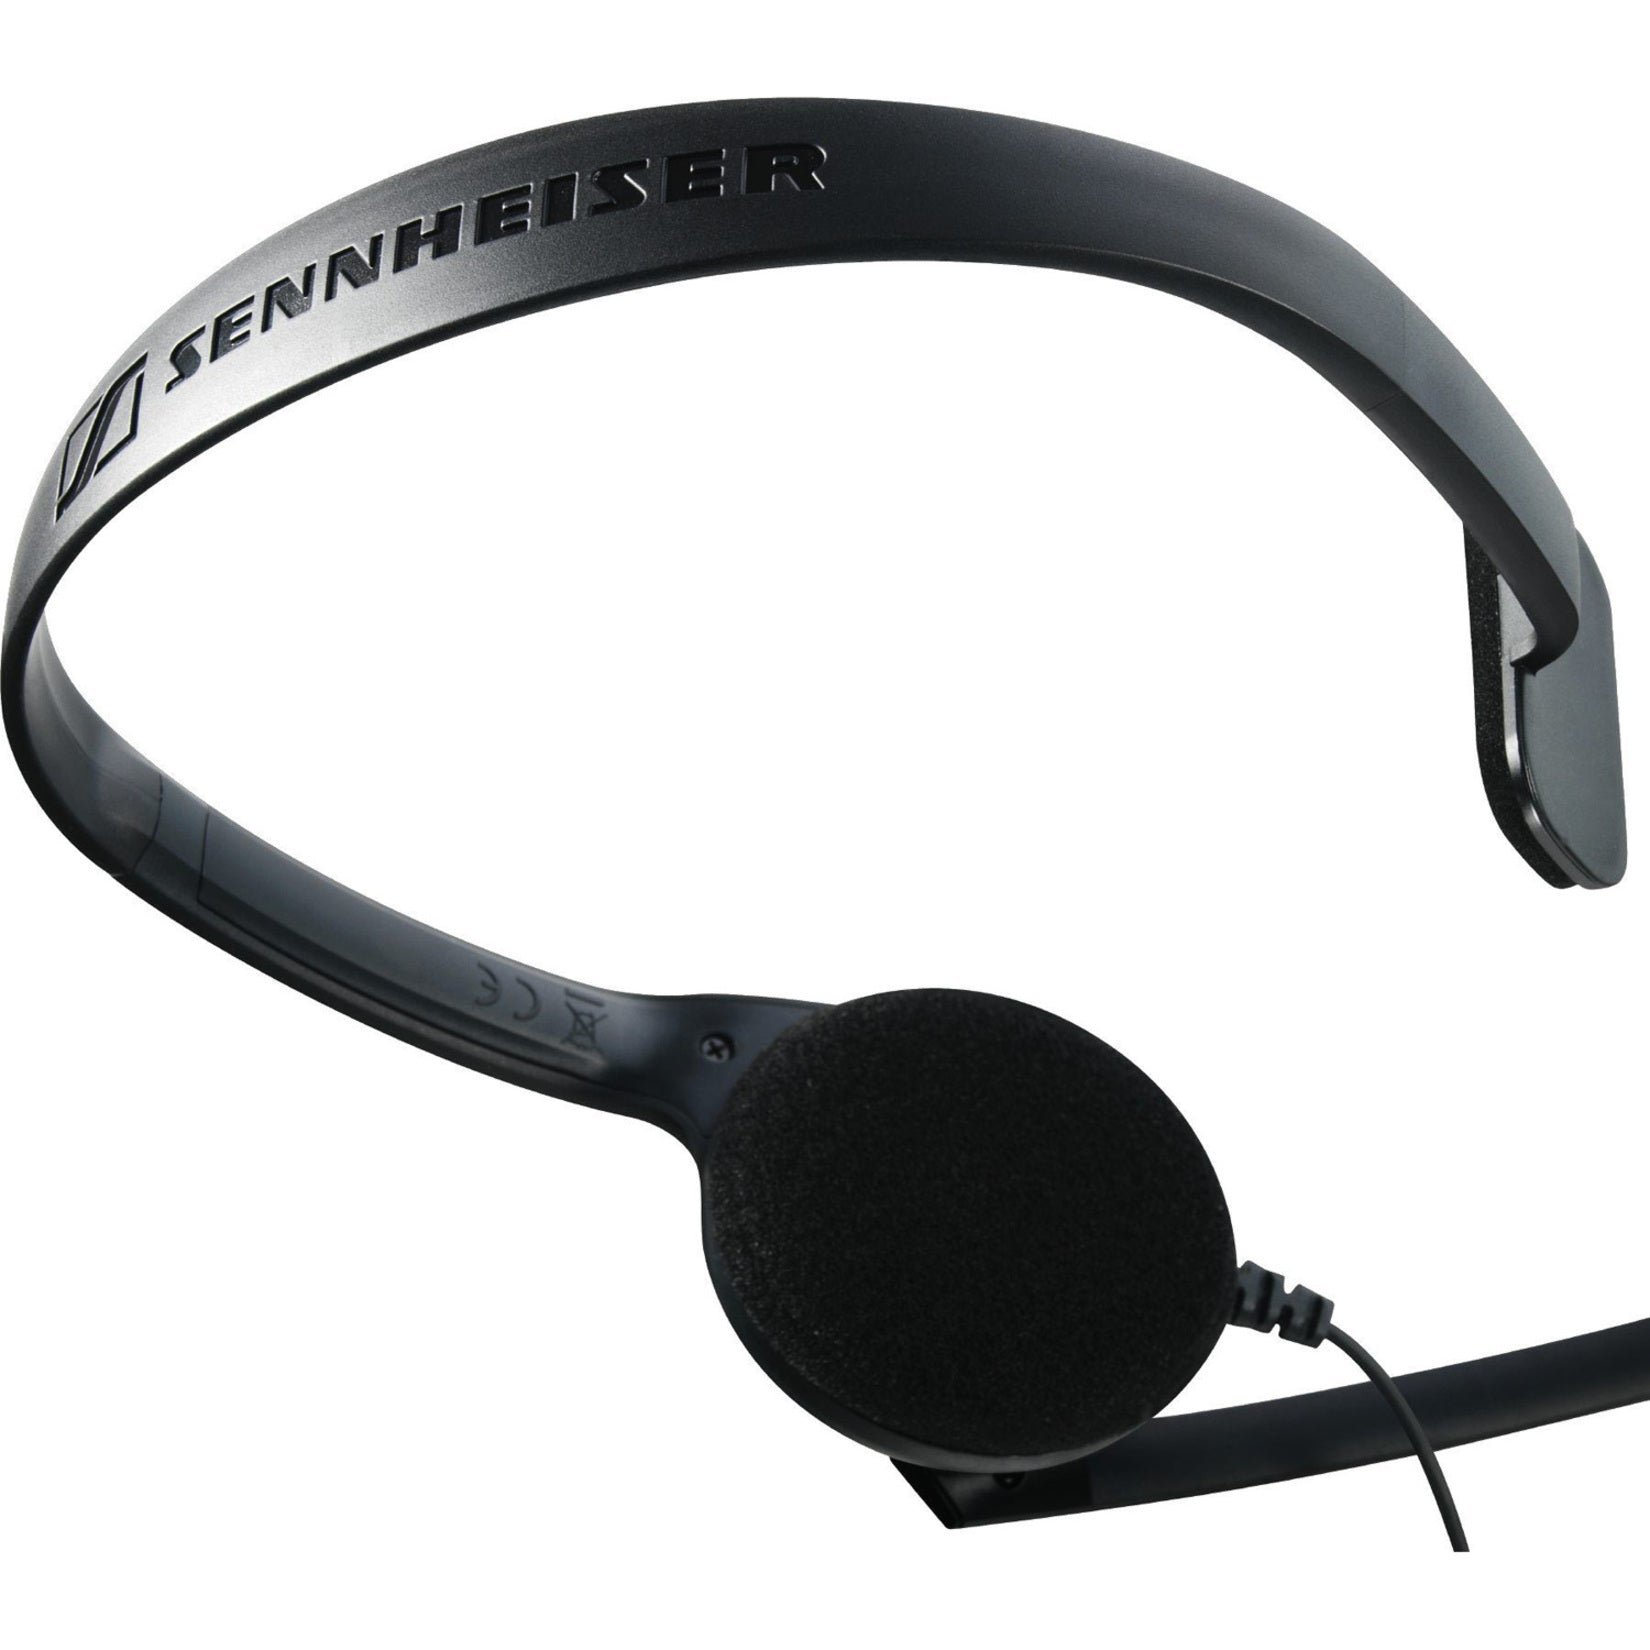 Sennheiser 504194 PC 2 CHAT Headset, Over-the-head Monaural Wired Headset with Noise Cancelling Microphone